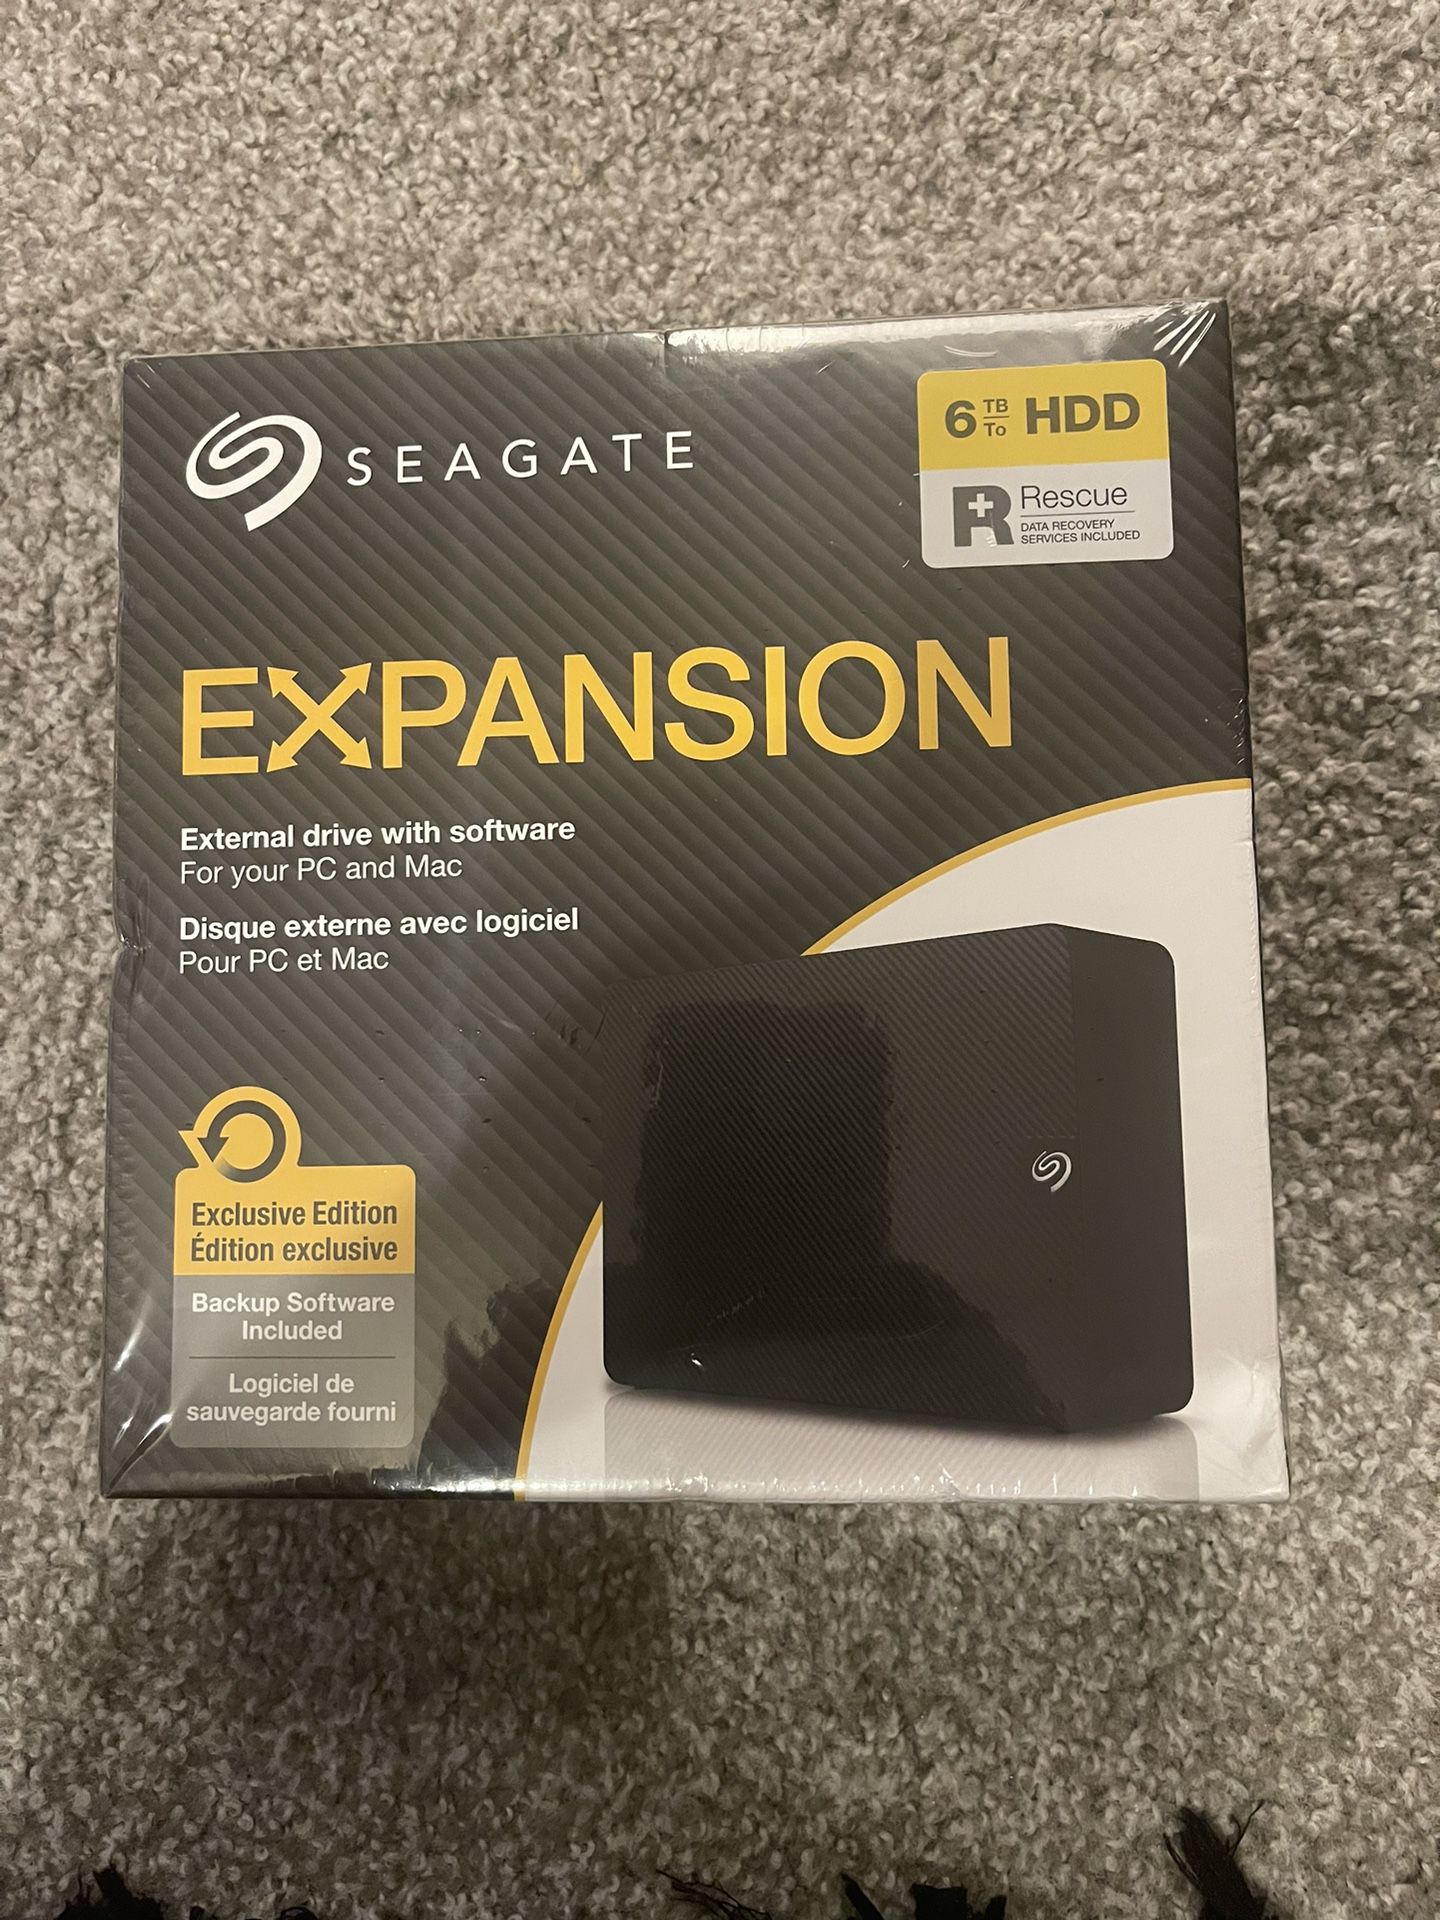 Seagate ExpansionPLUS 6TB External Hard Drive HDD - USB 3.0, with Rescue Data Recovery Services and Toolkit Backup Software